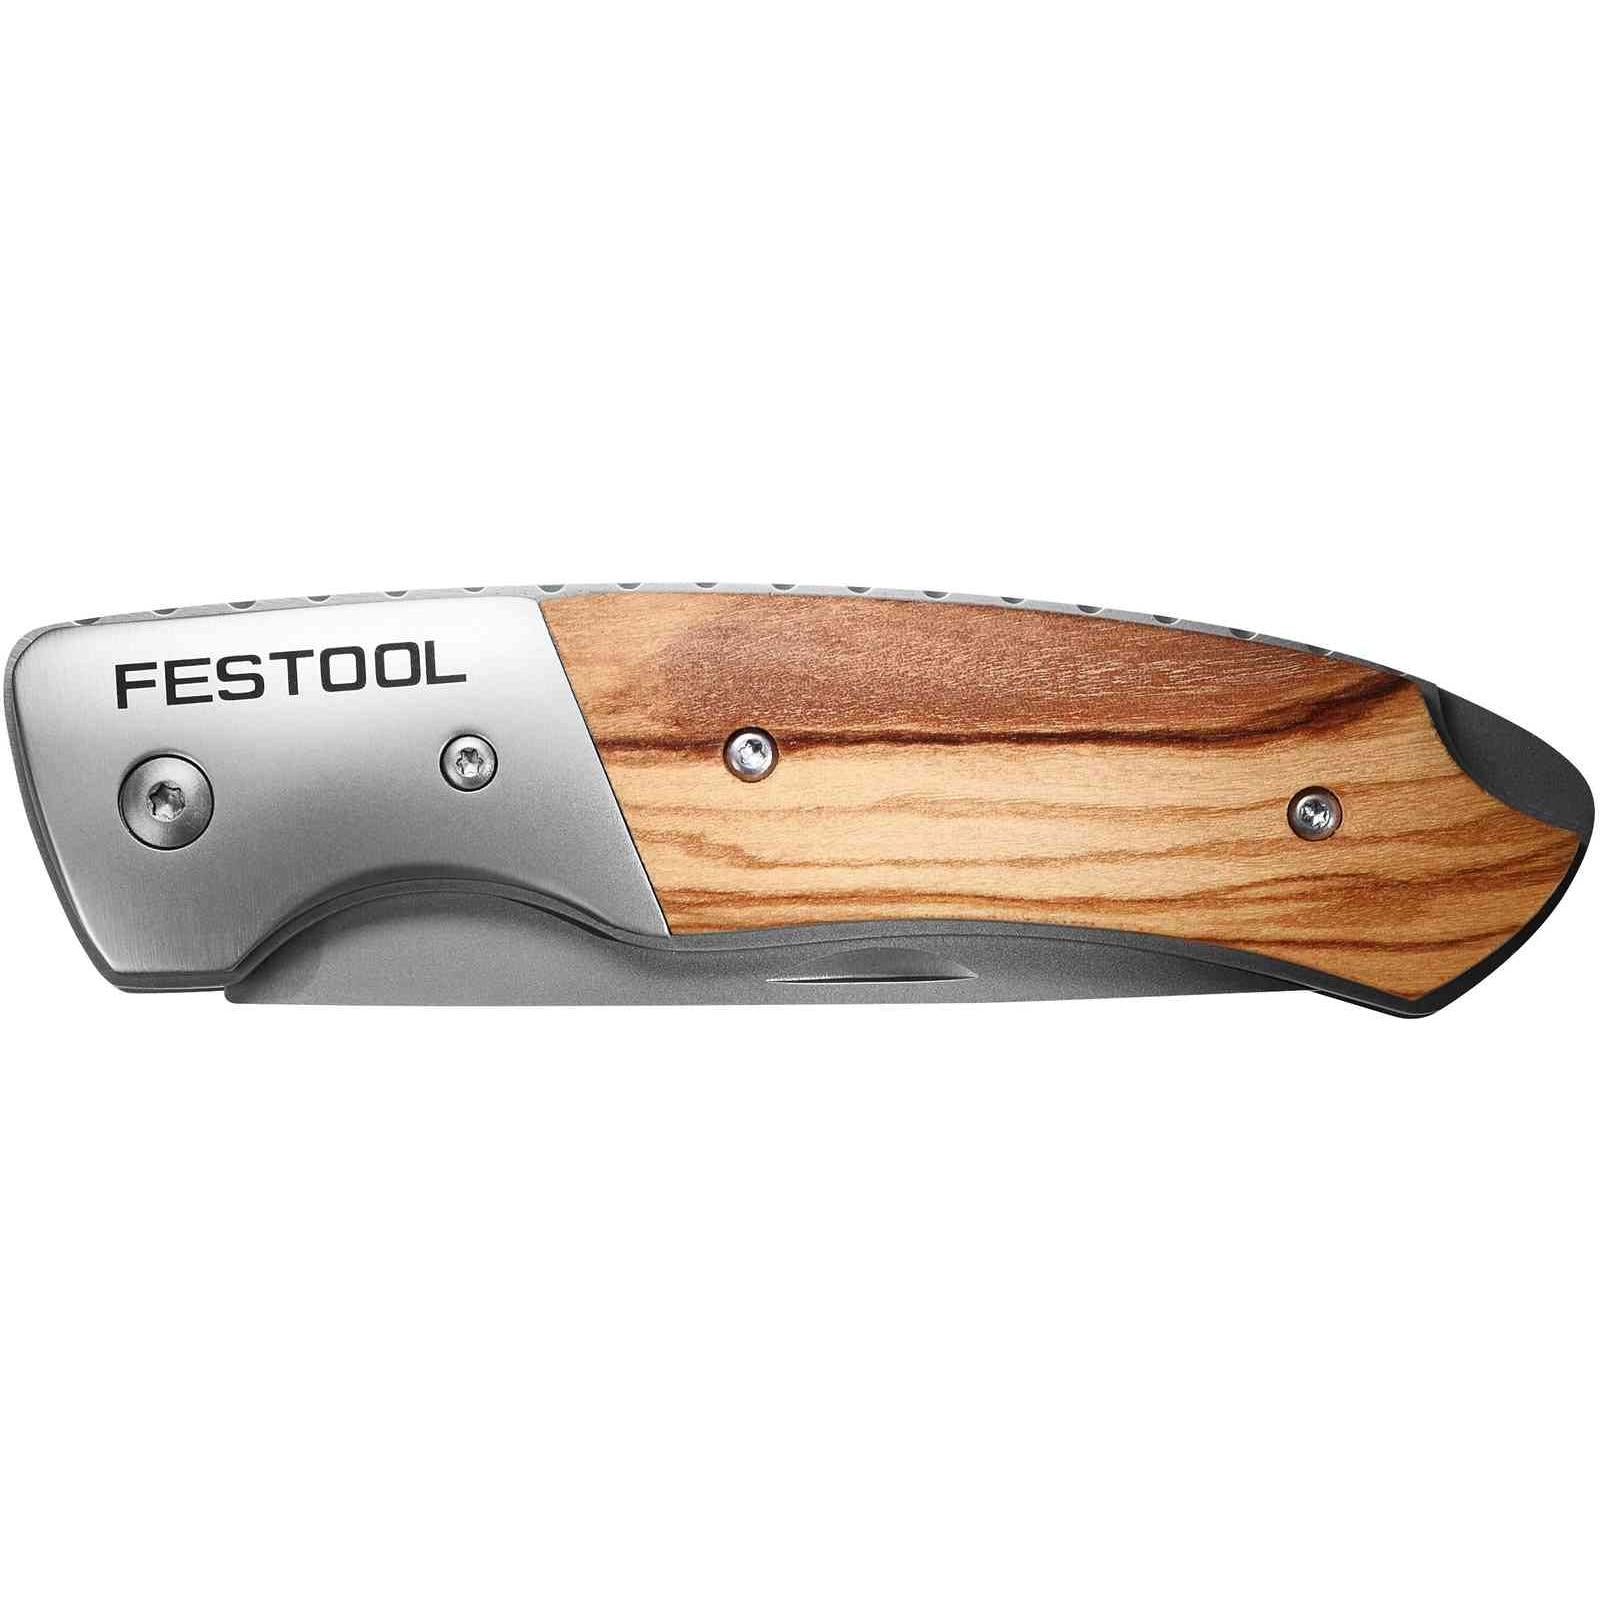 Festool Working knife 203994 Power Tool Services